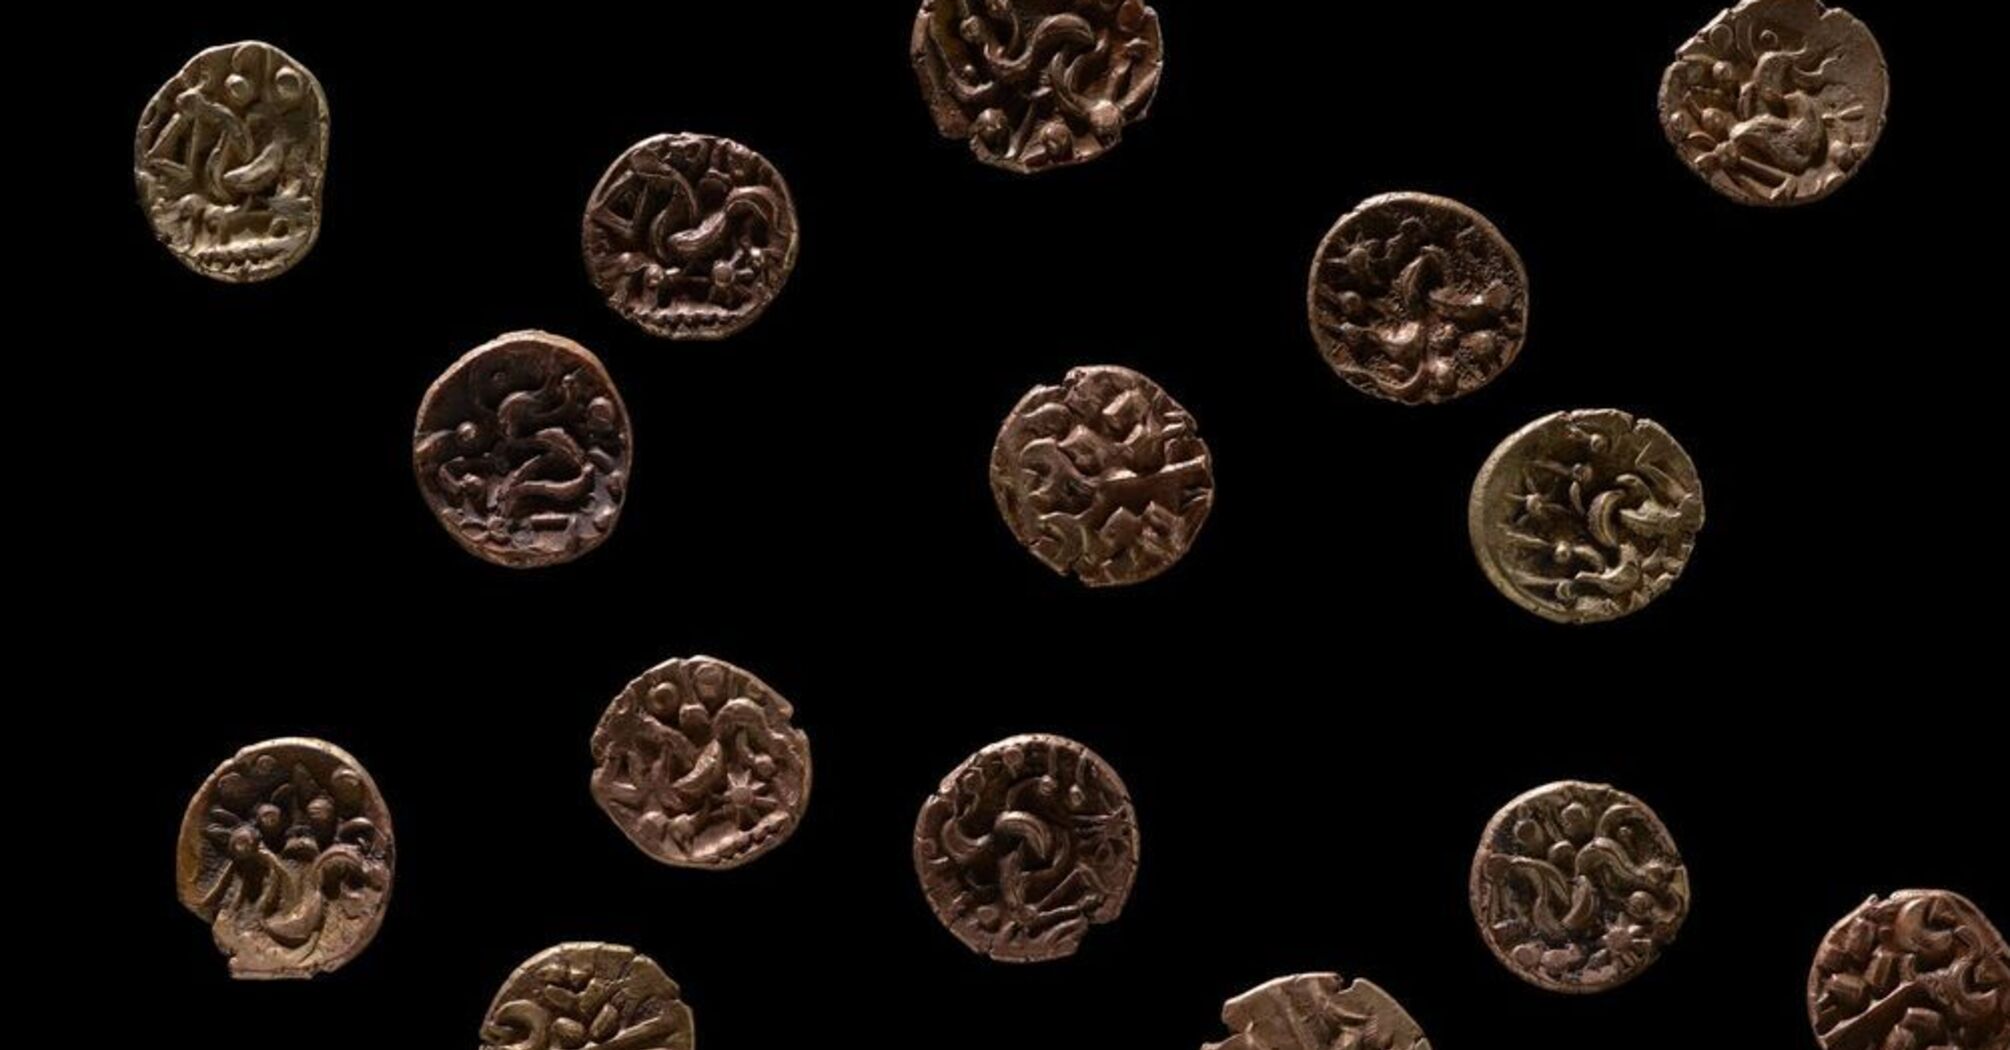 A treasure trove of gold coins dating back over 2000 years found in Britain